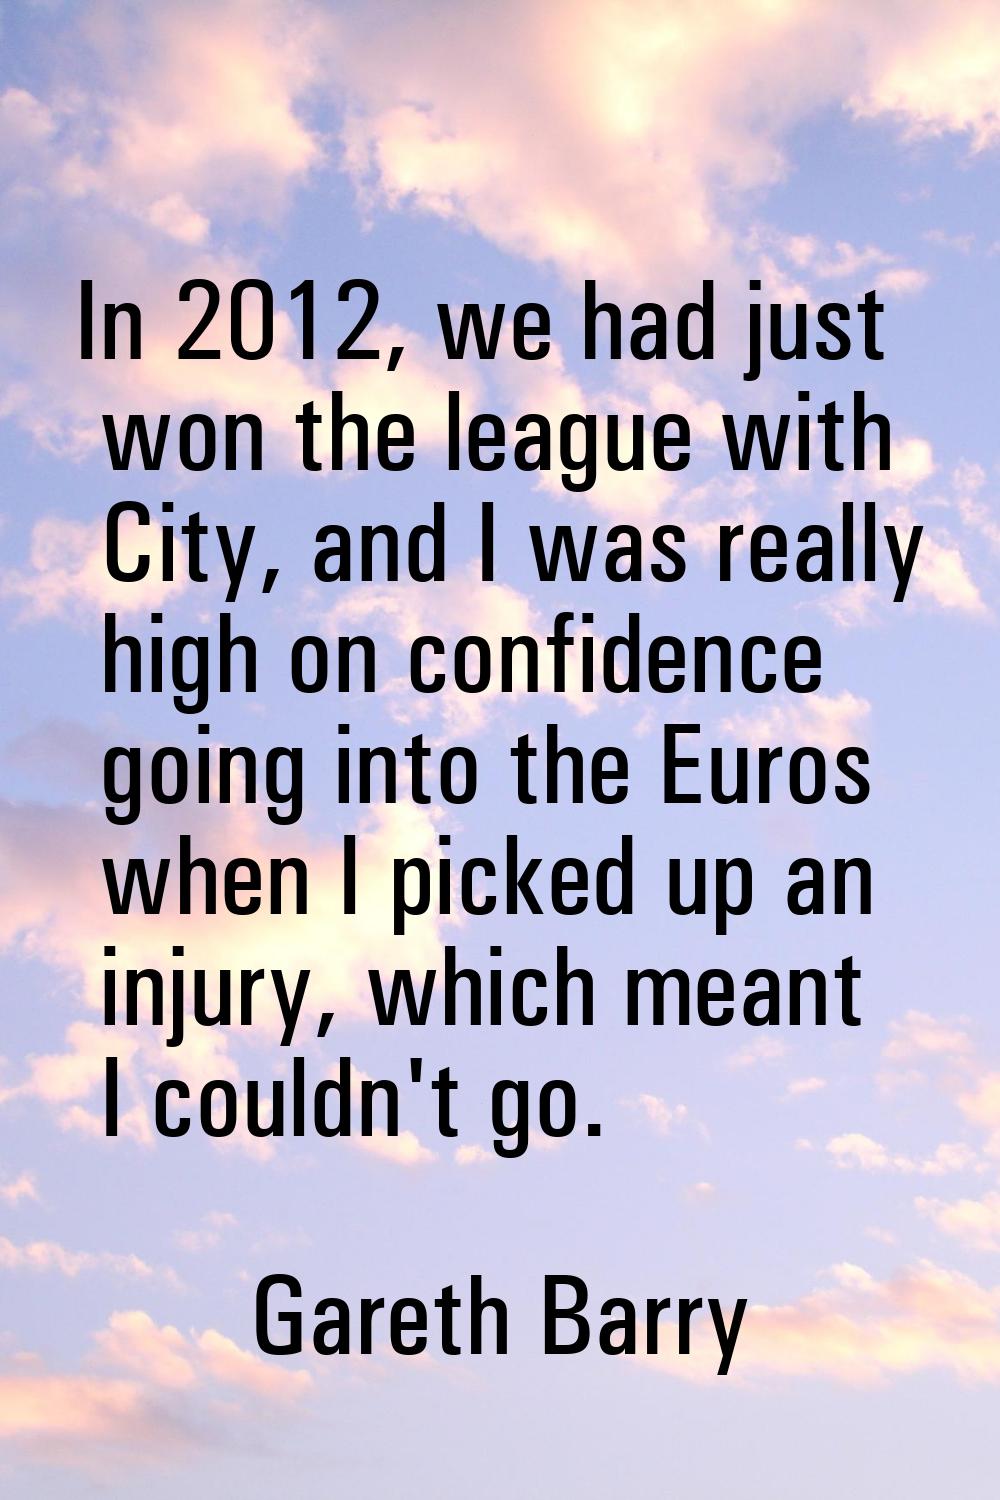 In 2012, we had just won the league with City, and I was really high on confidence going into the E